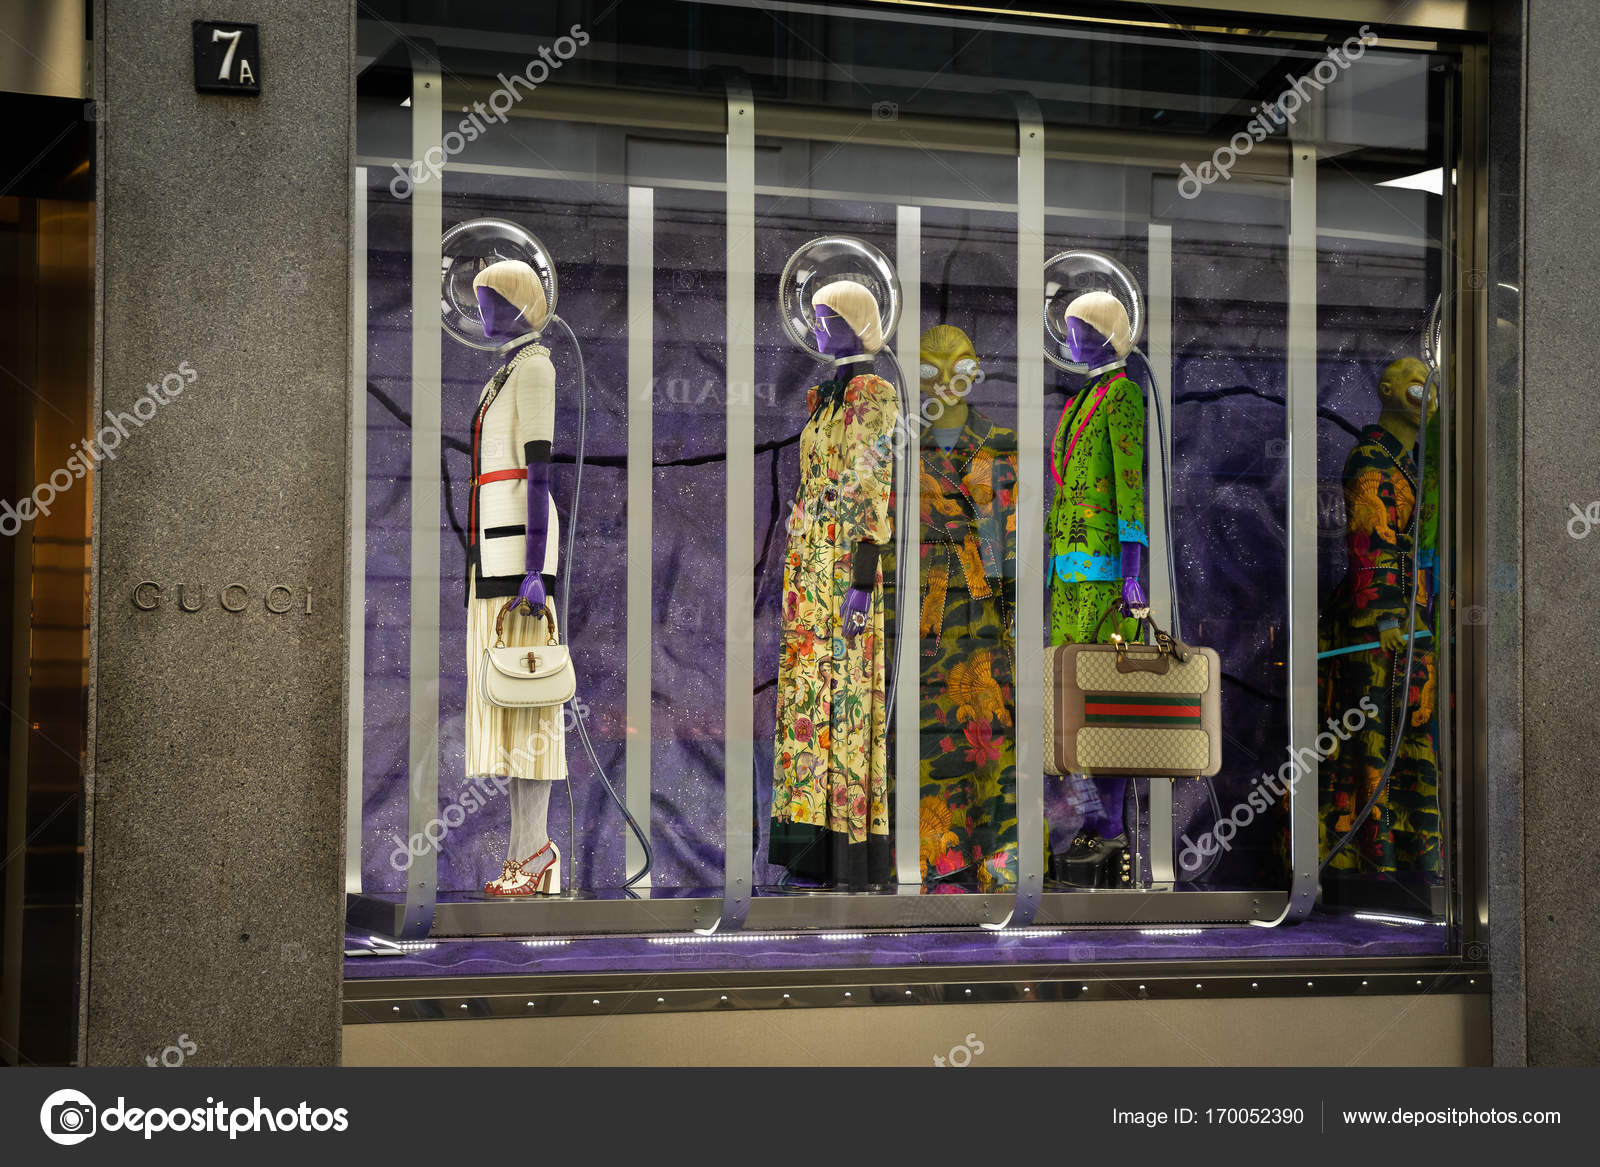 Milan, Italy - February 28, 2017: Shop Window Of A Gucci Shop In Milan -  Montenapoleone Area, Italy. Few Days After Milan Fashion Week. Gucci Bags  Spring Summer 2017 Collection. Stock Photo